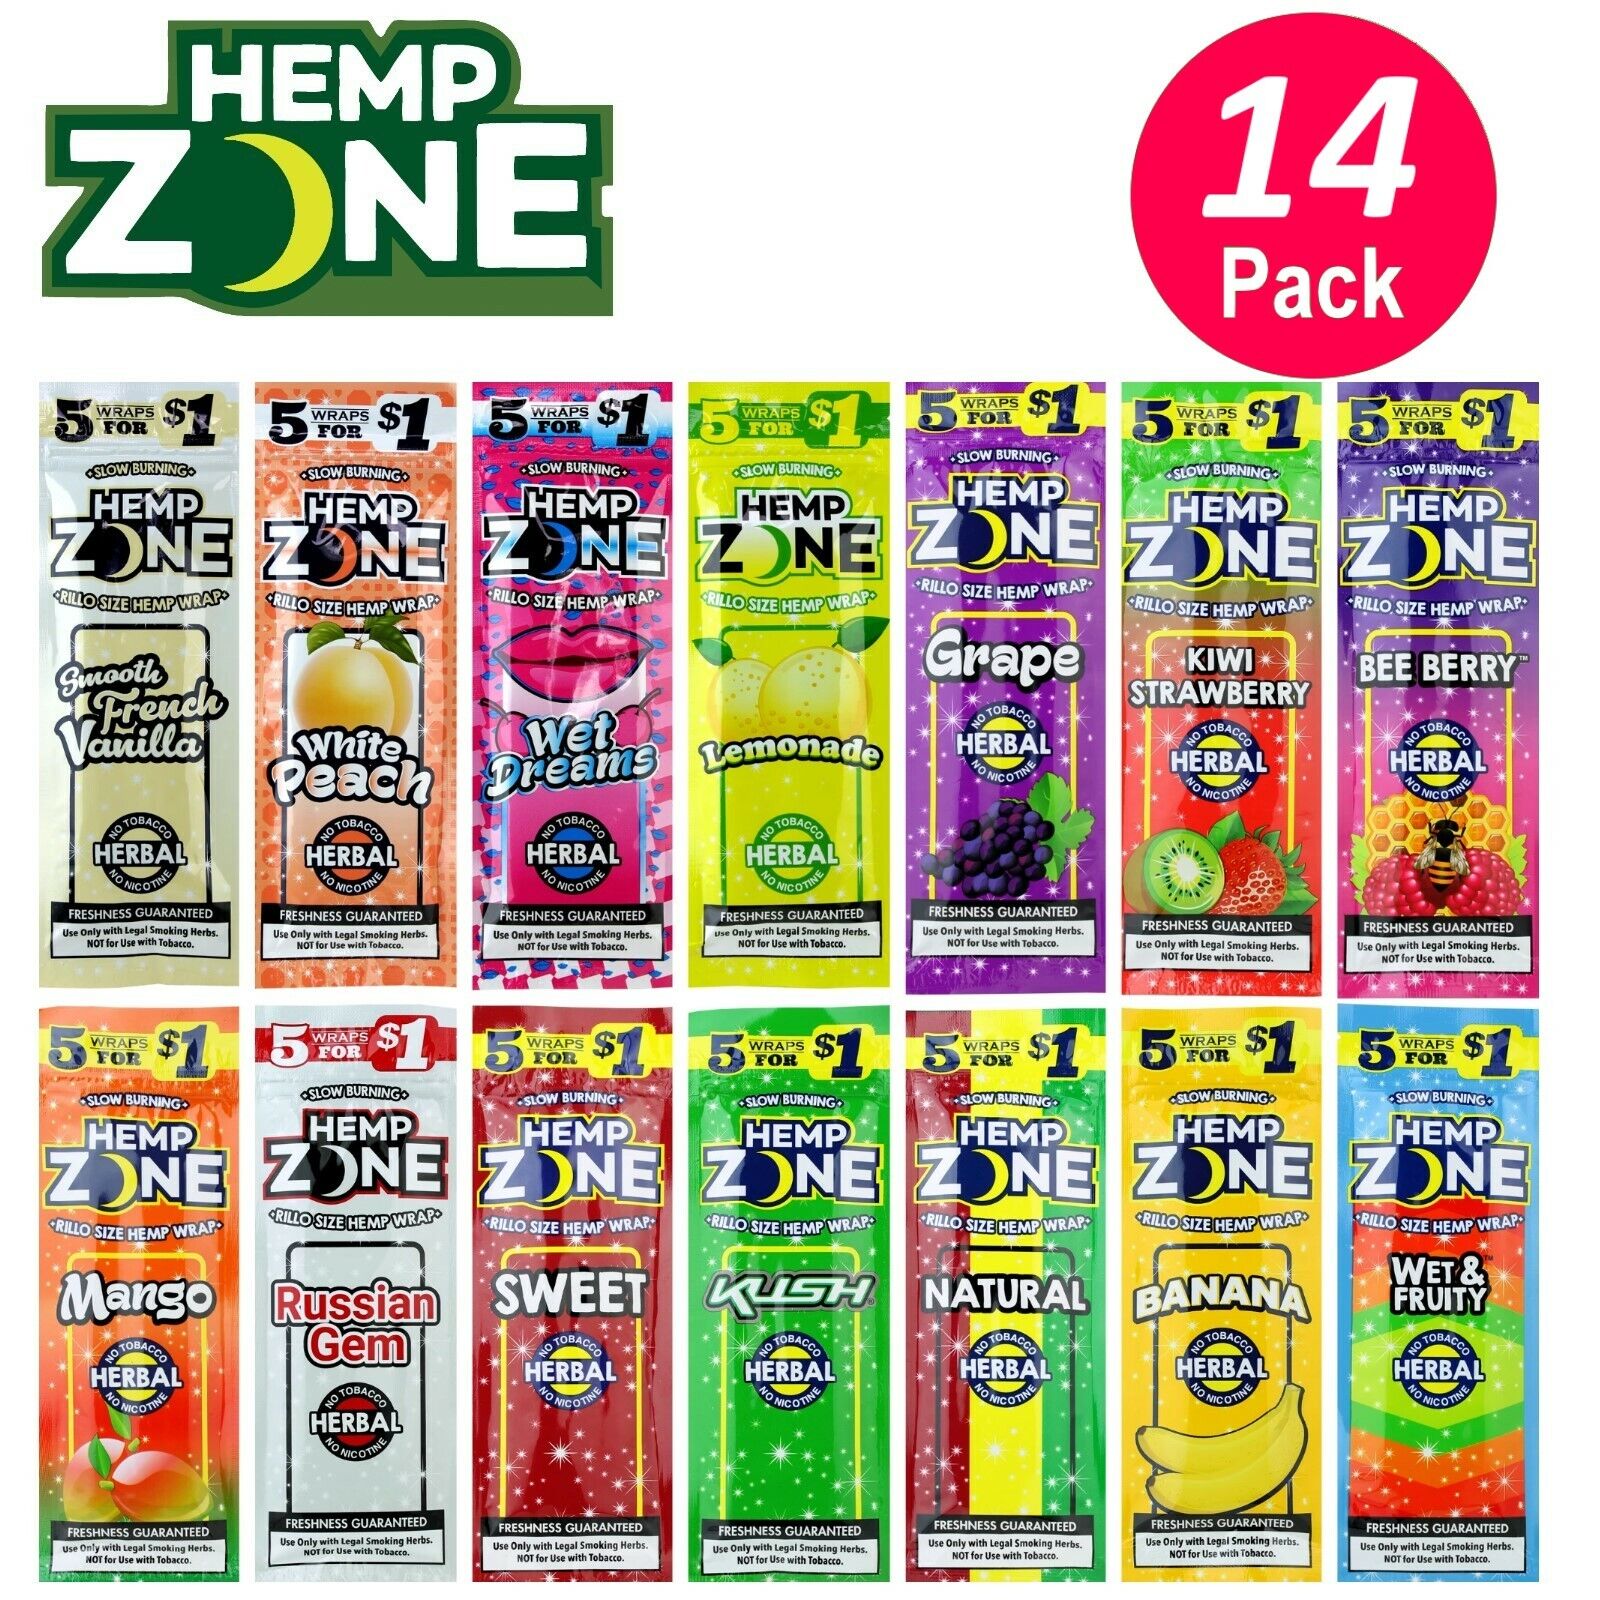 H. Zone Organic Wrap Variety Pack 14 Pouches, 5 Per Pouch - 70 Wraps Total